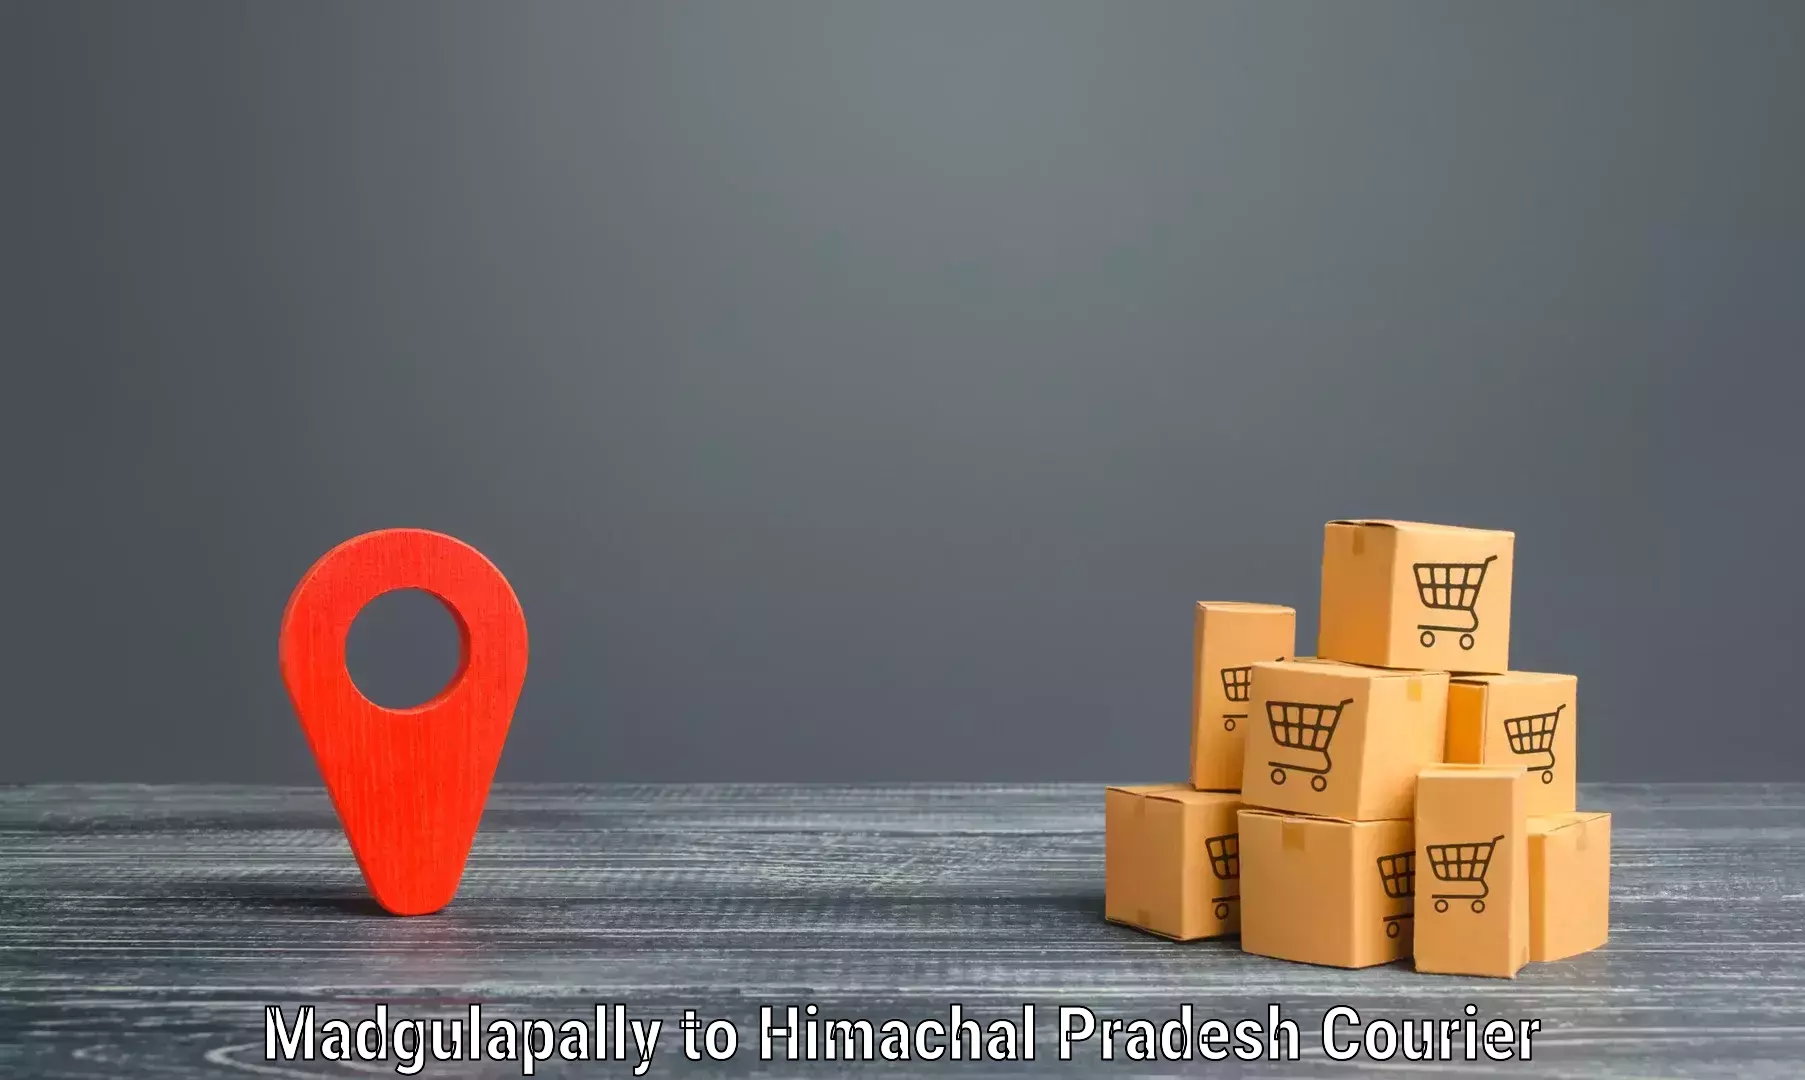 Courier service efficiency Madgulapally to Himachal Pradesh